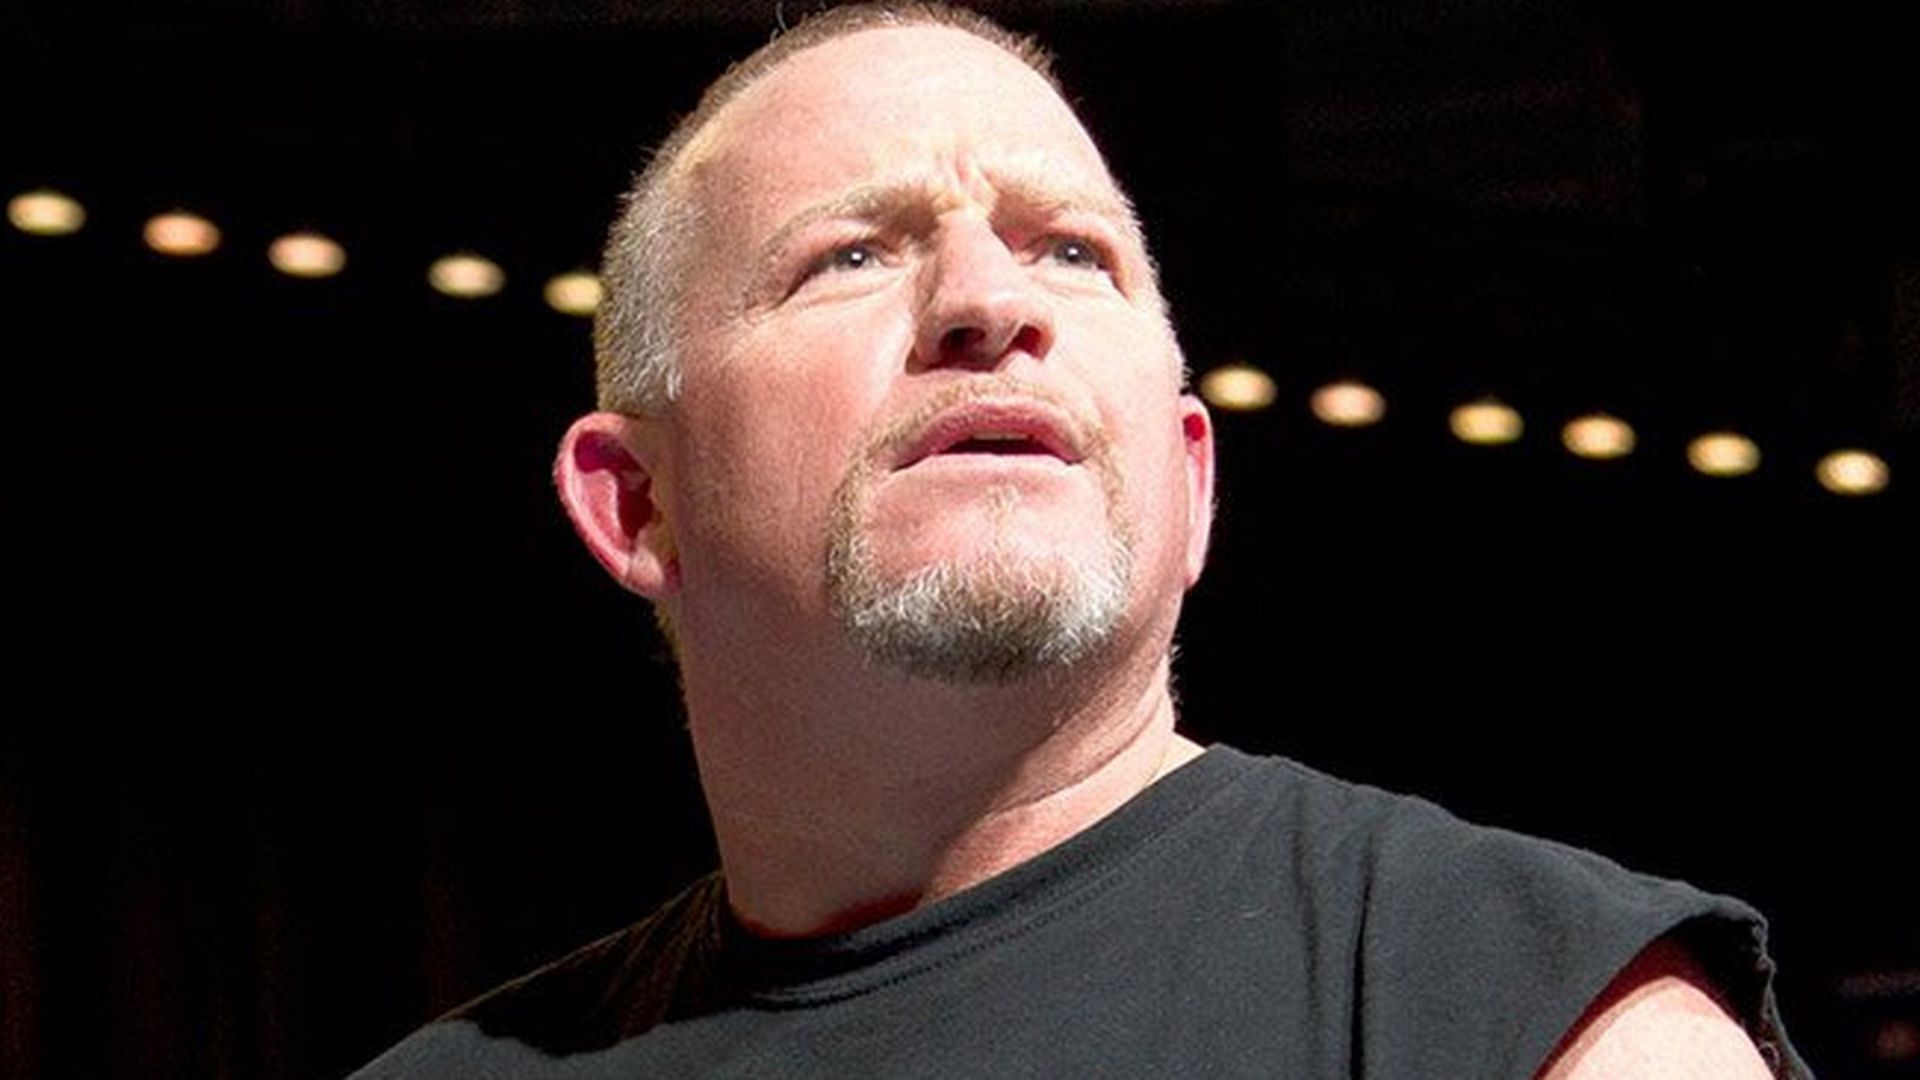 WWE Hall of Famer Road Dogg is awestruck by current superstar